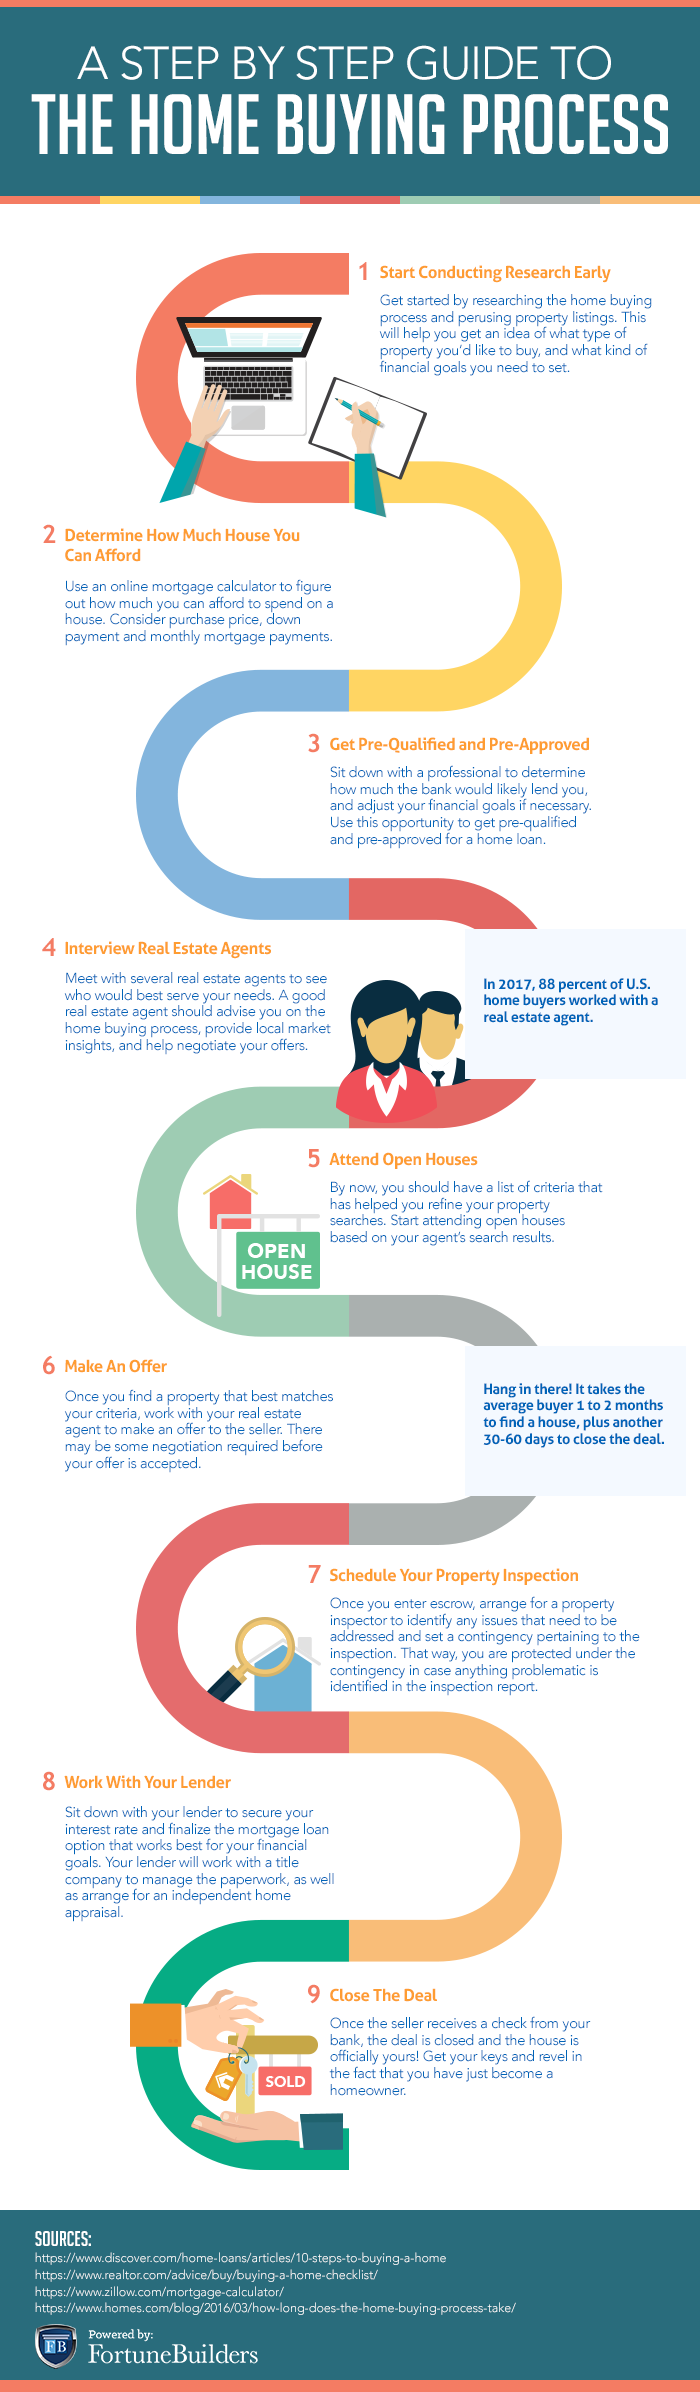 The home buying process